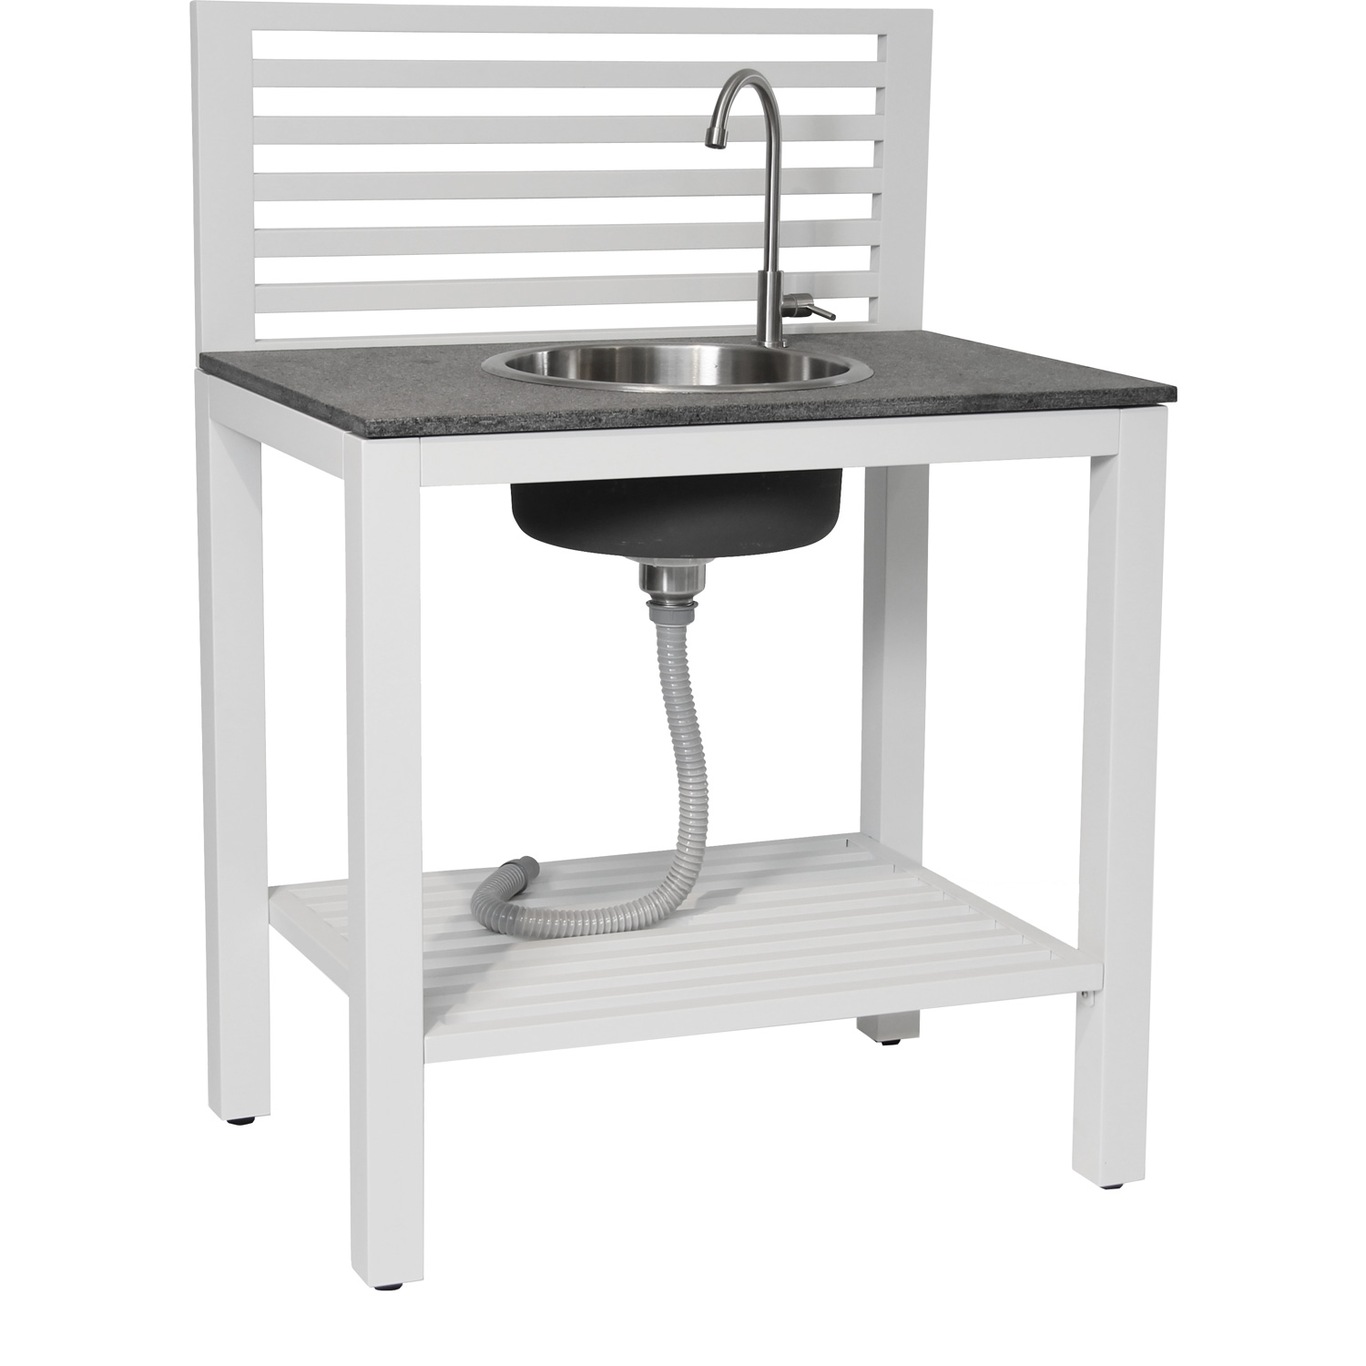 Bellac Outdoor Kitchen With Sink, White